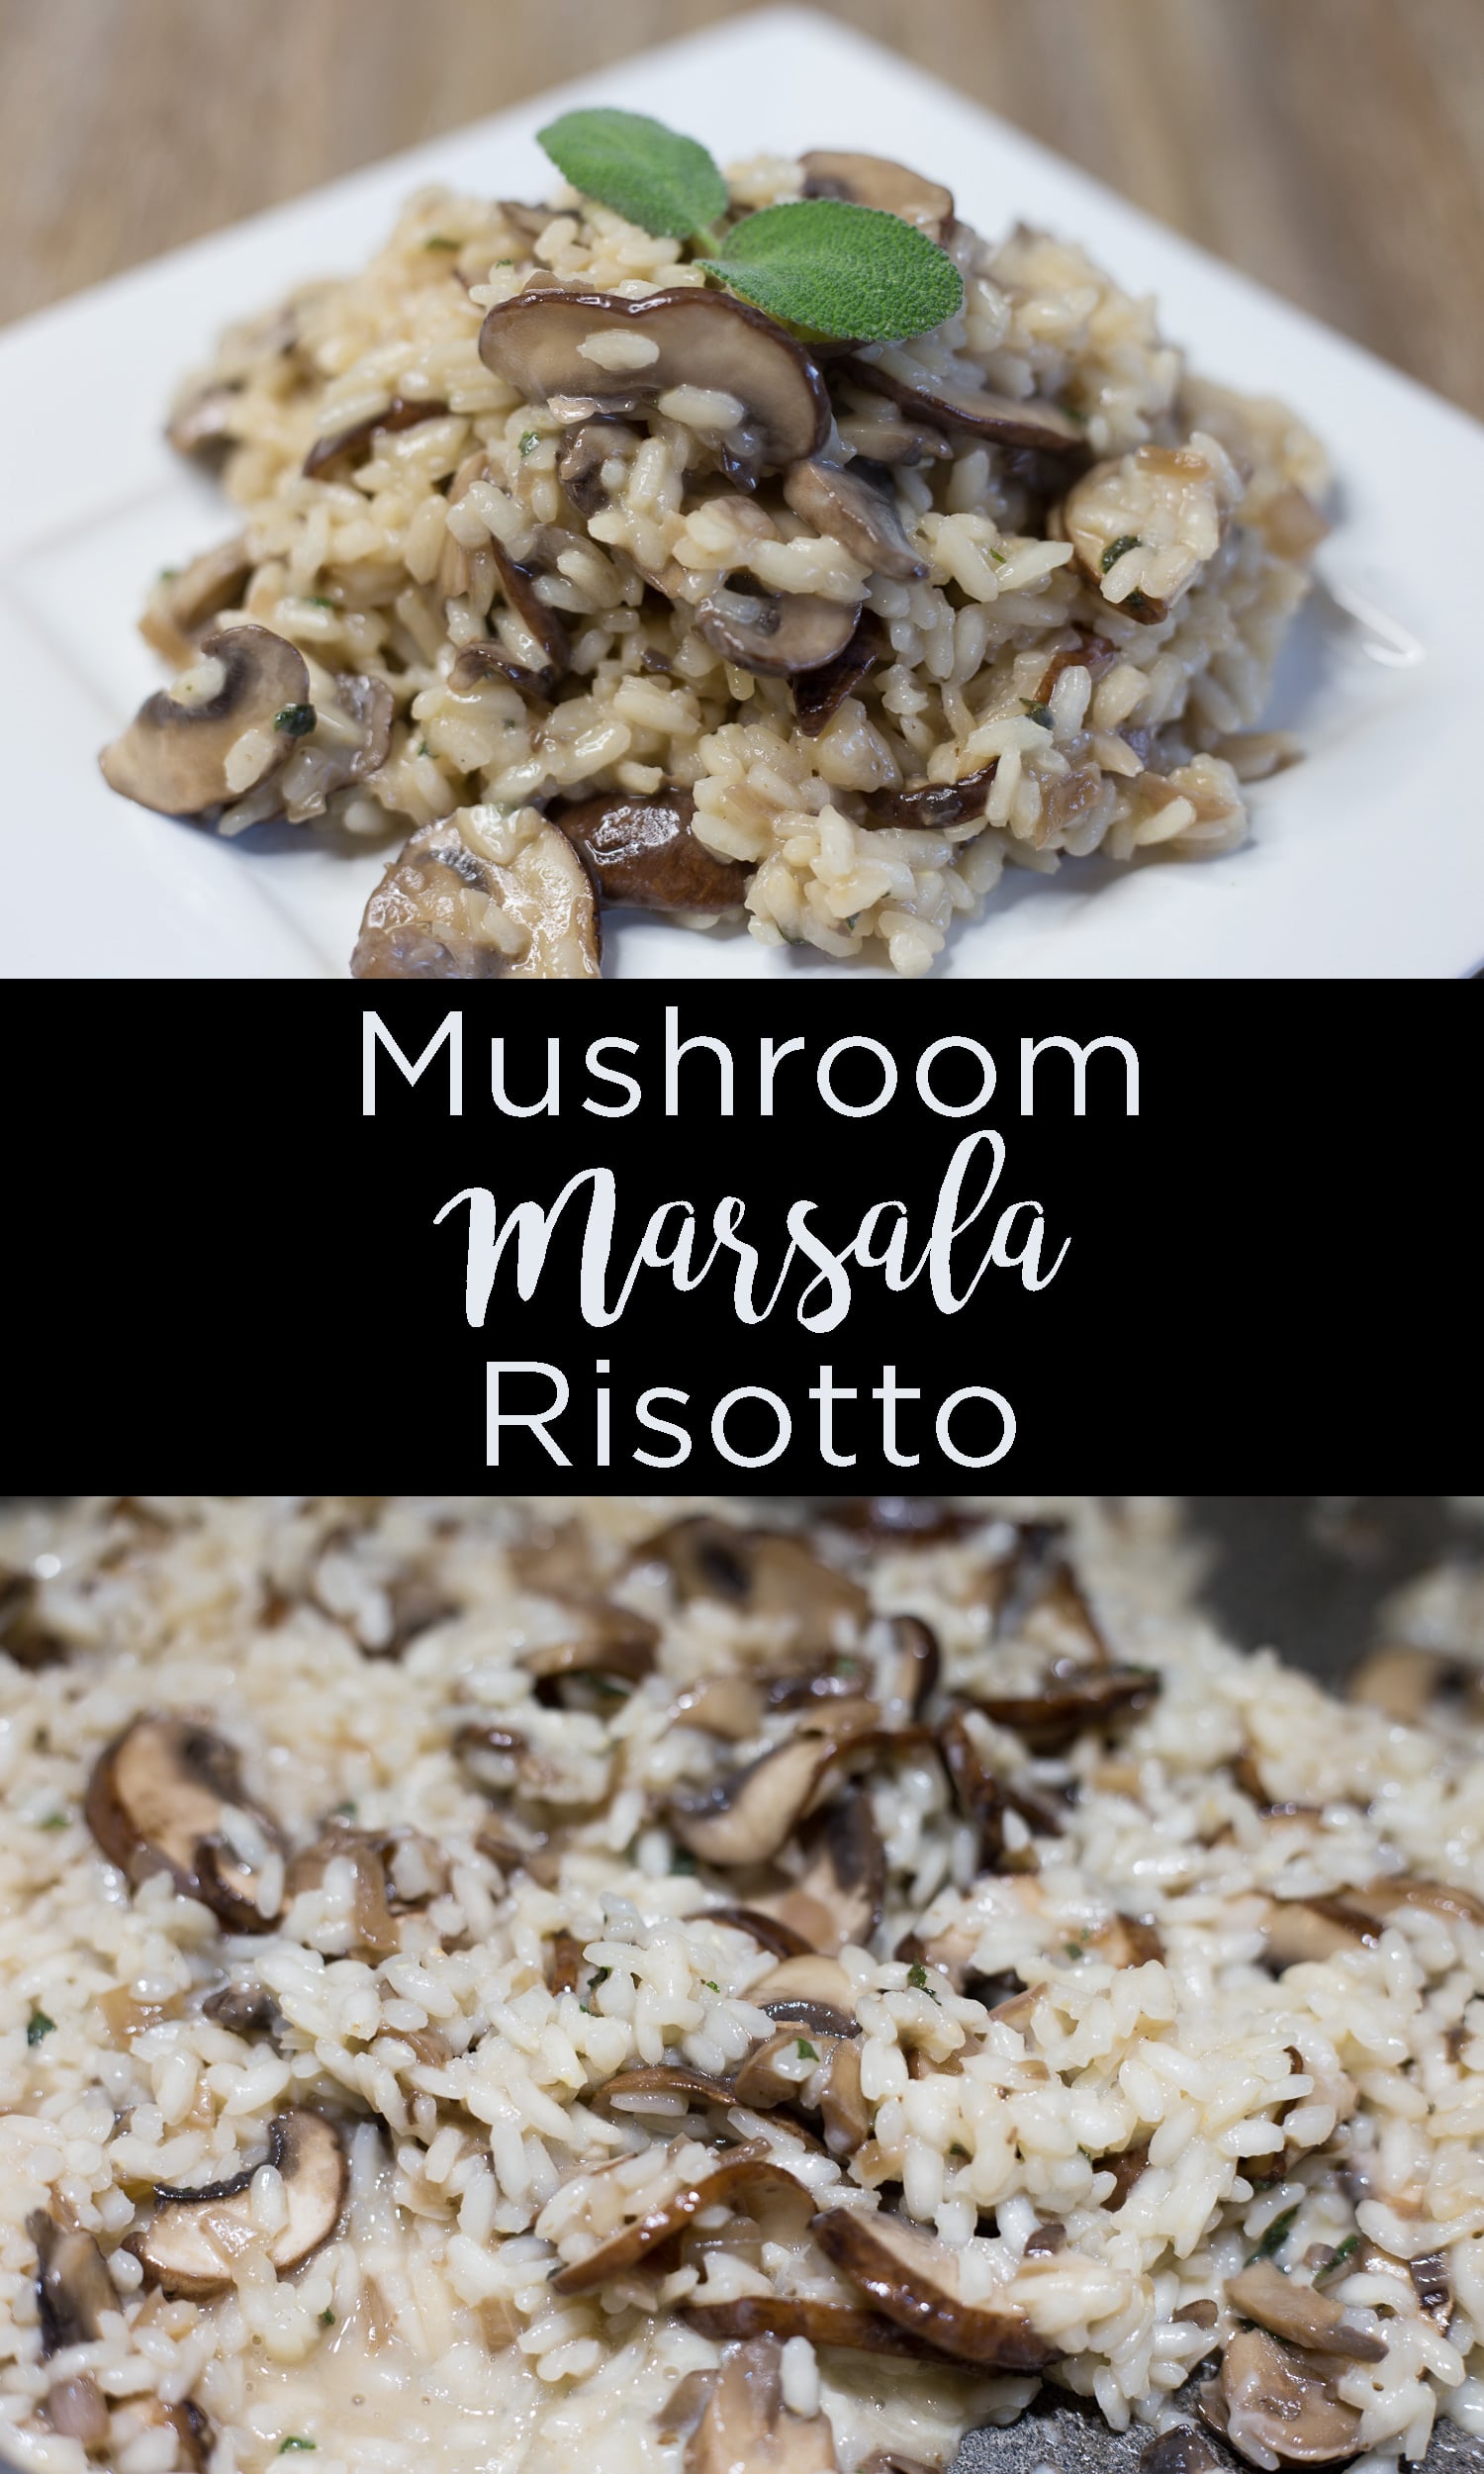 Mushroom marsala risotto was inspired by marsala chicken. All the flavors of marsala chicken in a risotto! |artzyfoodie.com|